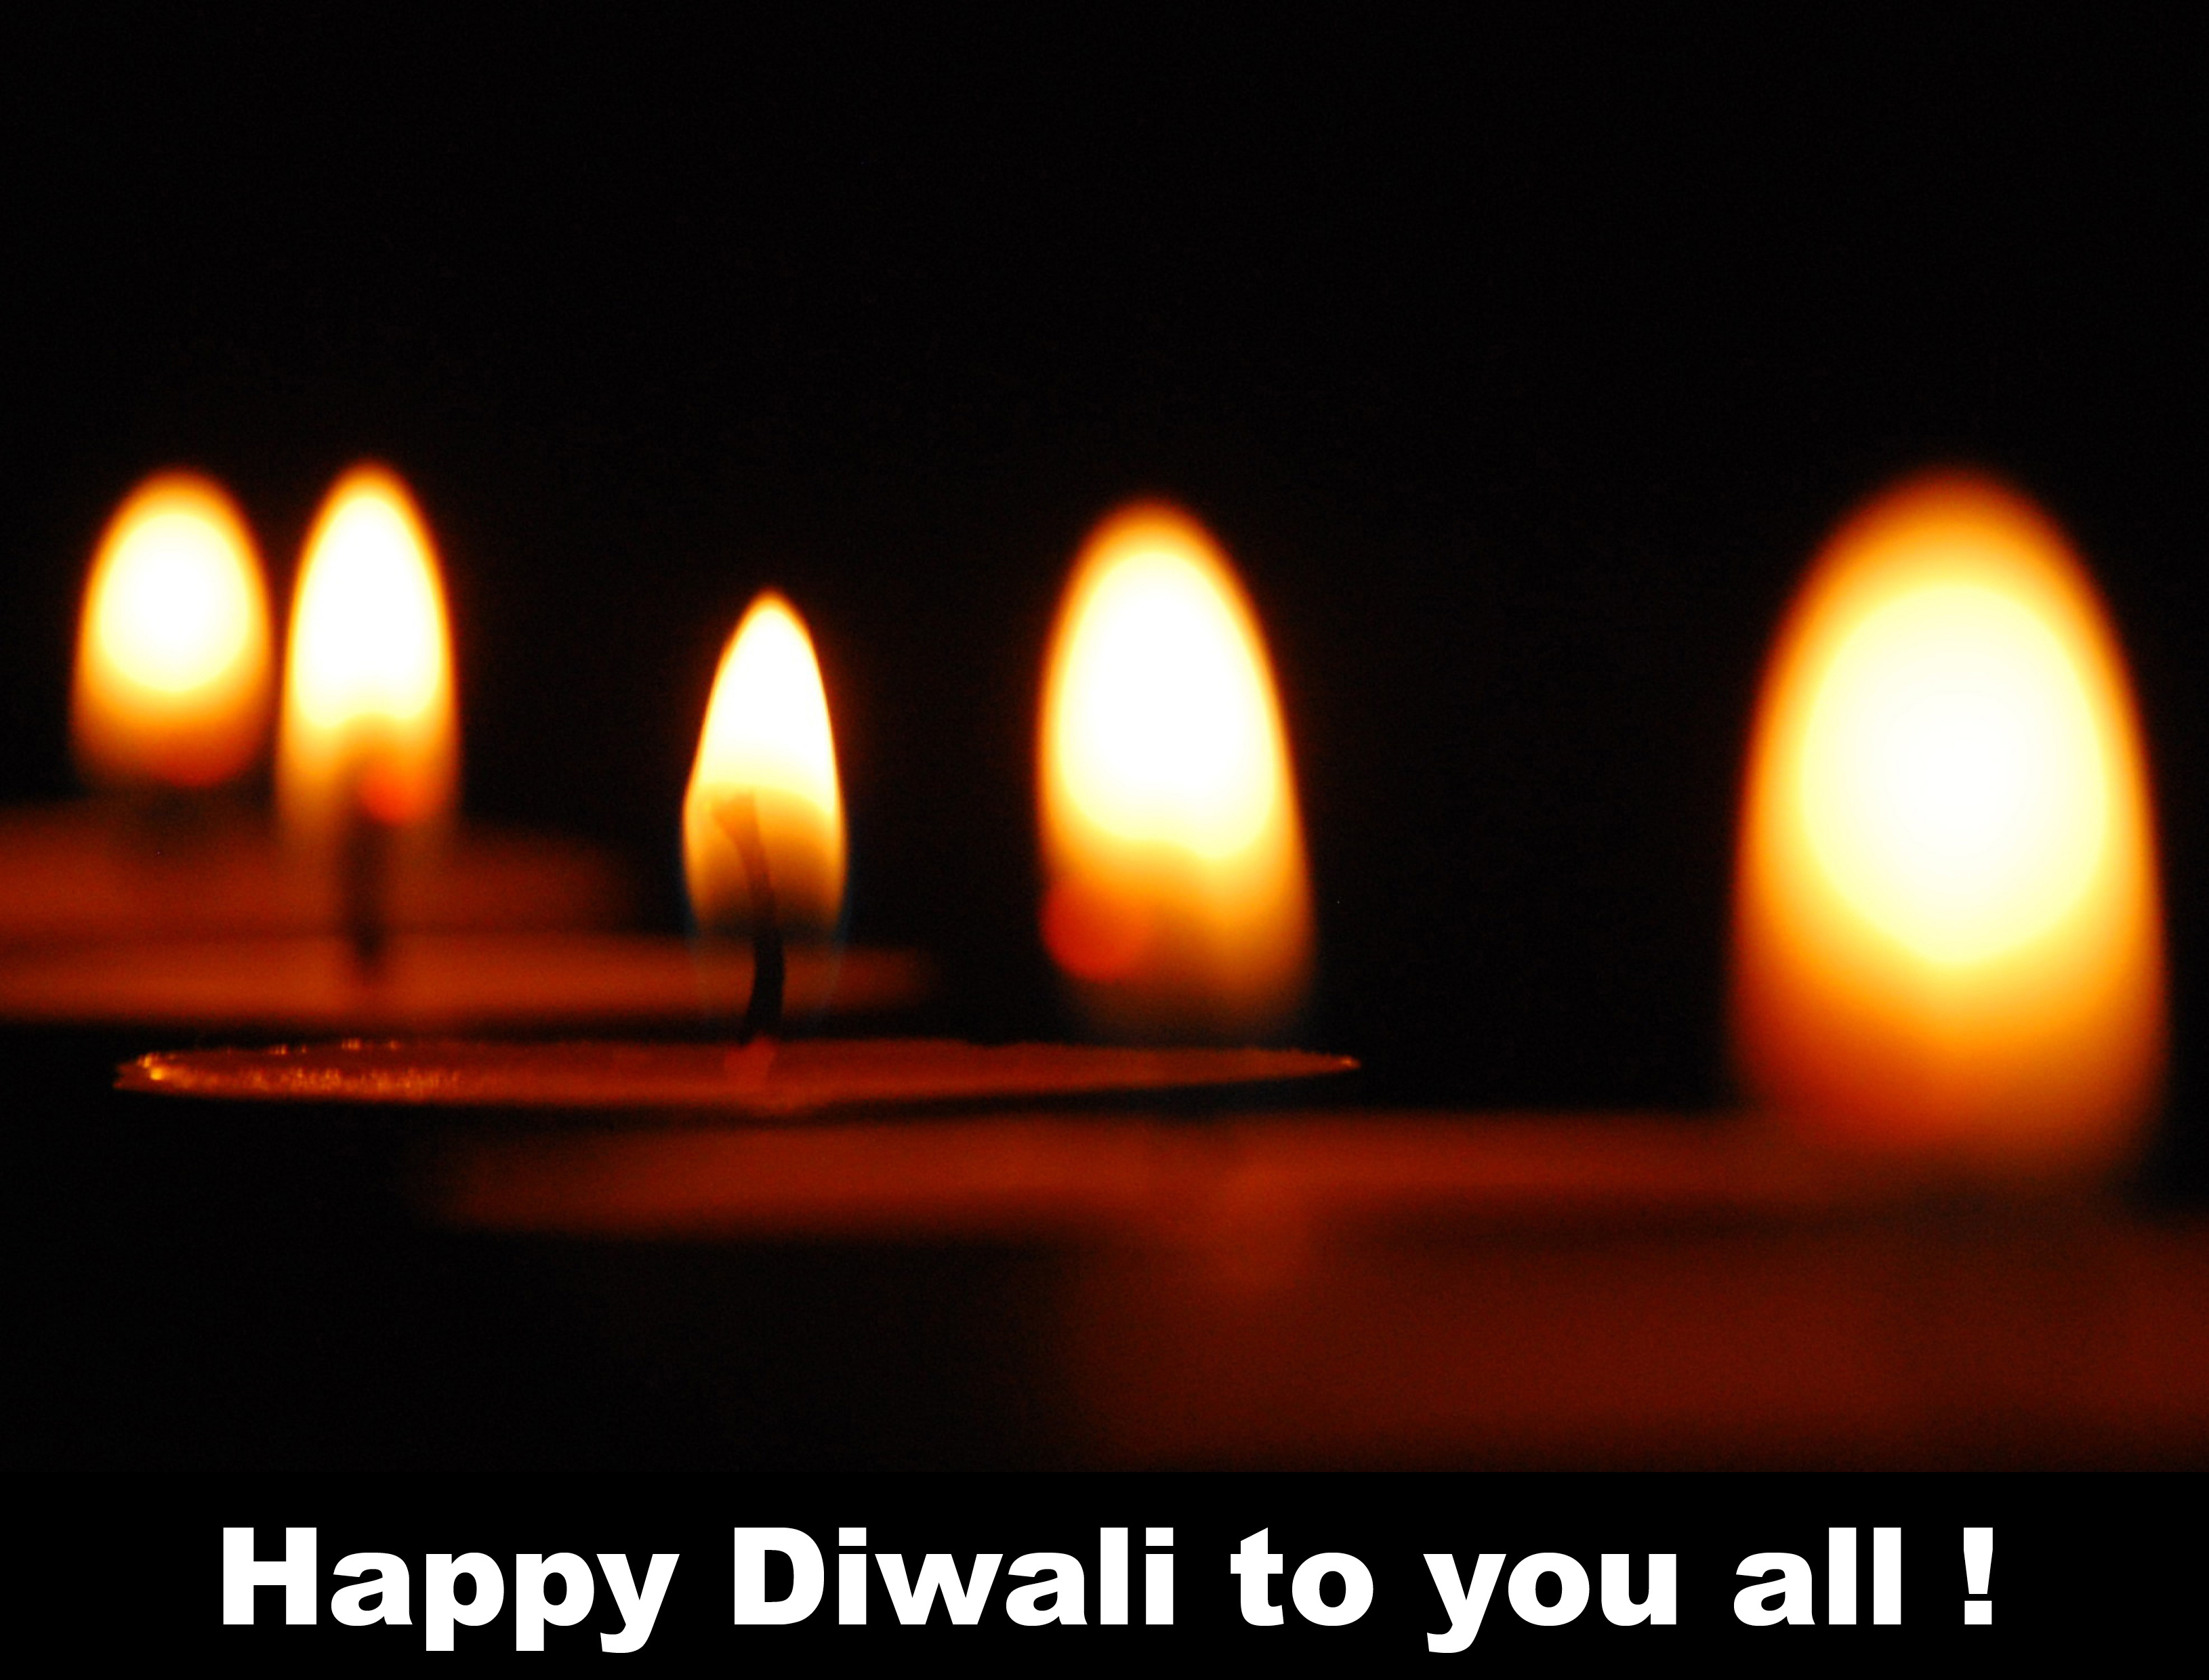 Happy Diwali to you all ! 